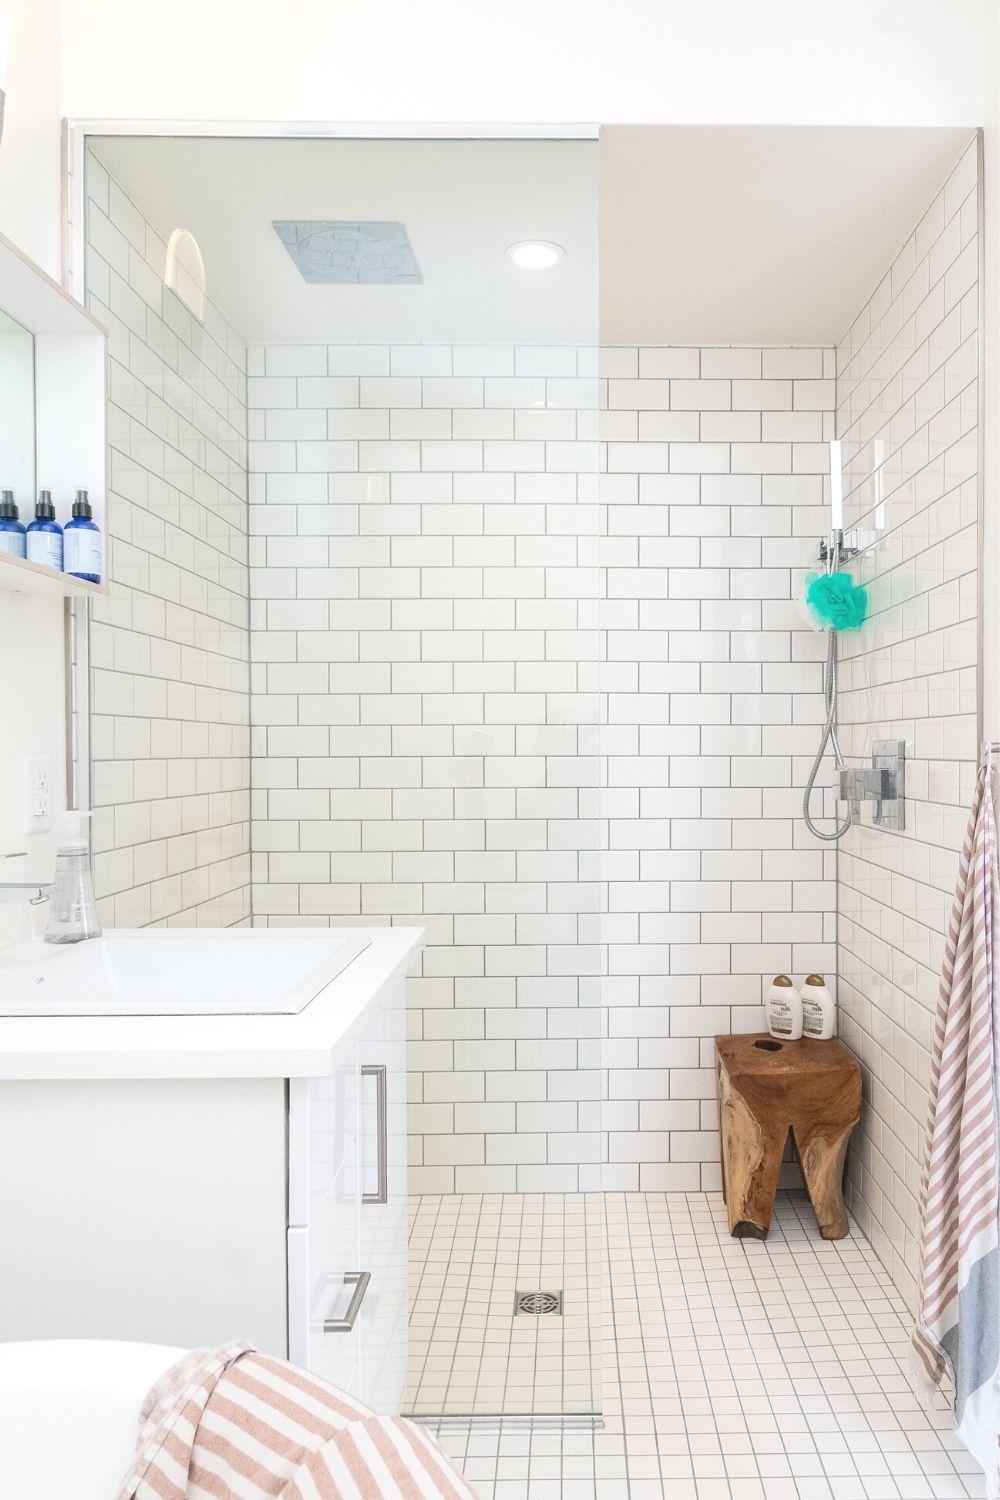 4 ways to clean your shower screen the natural way 